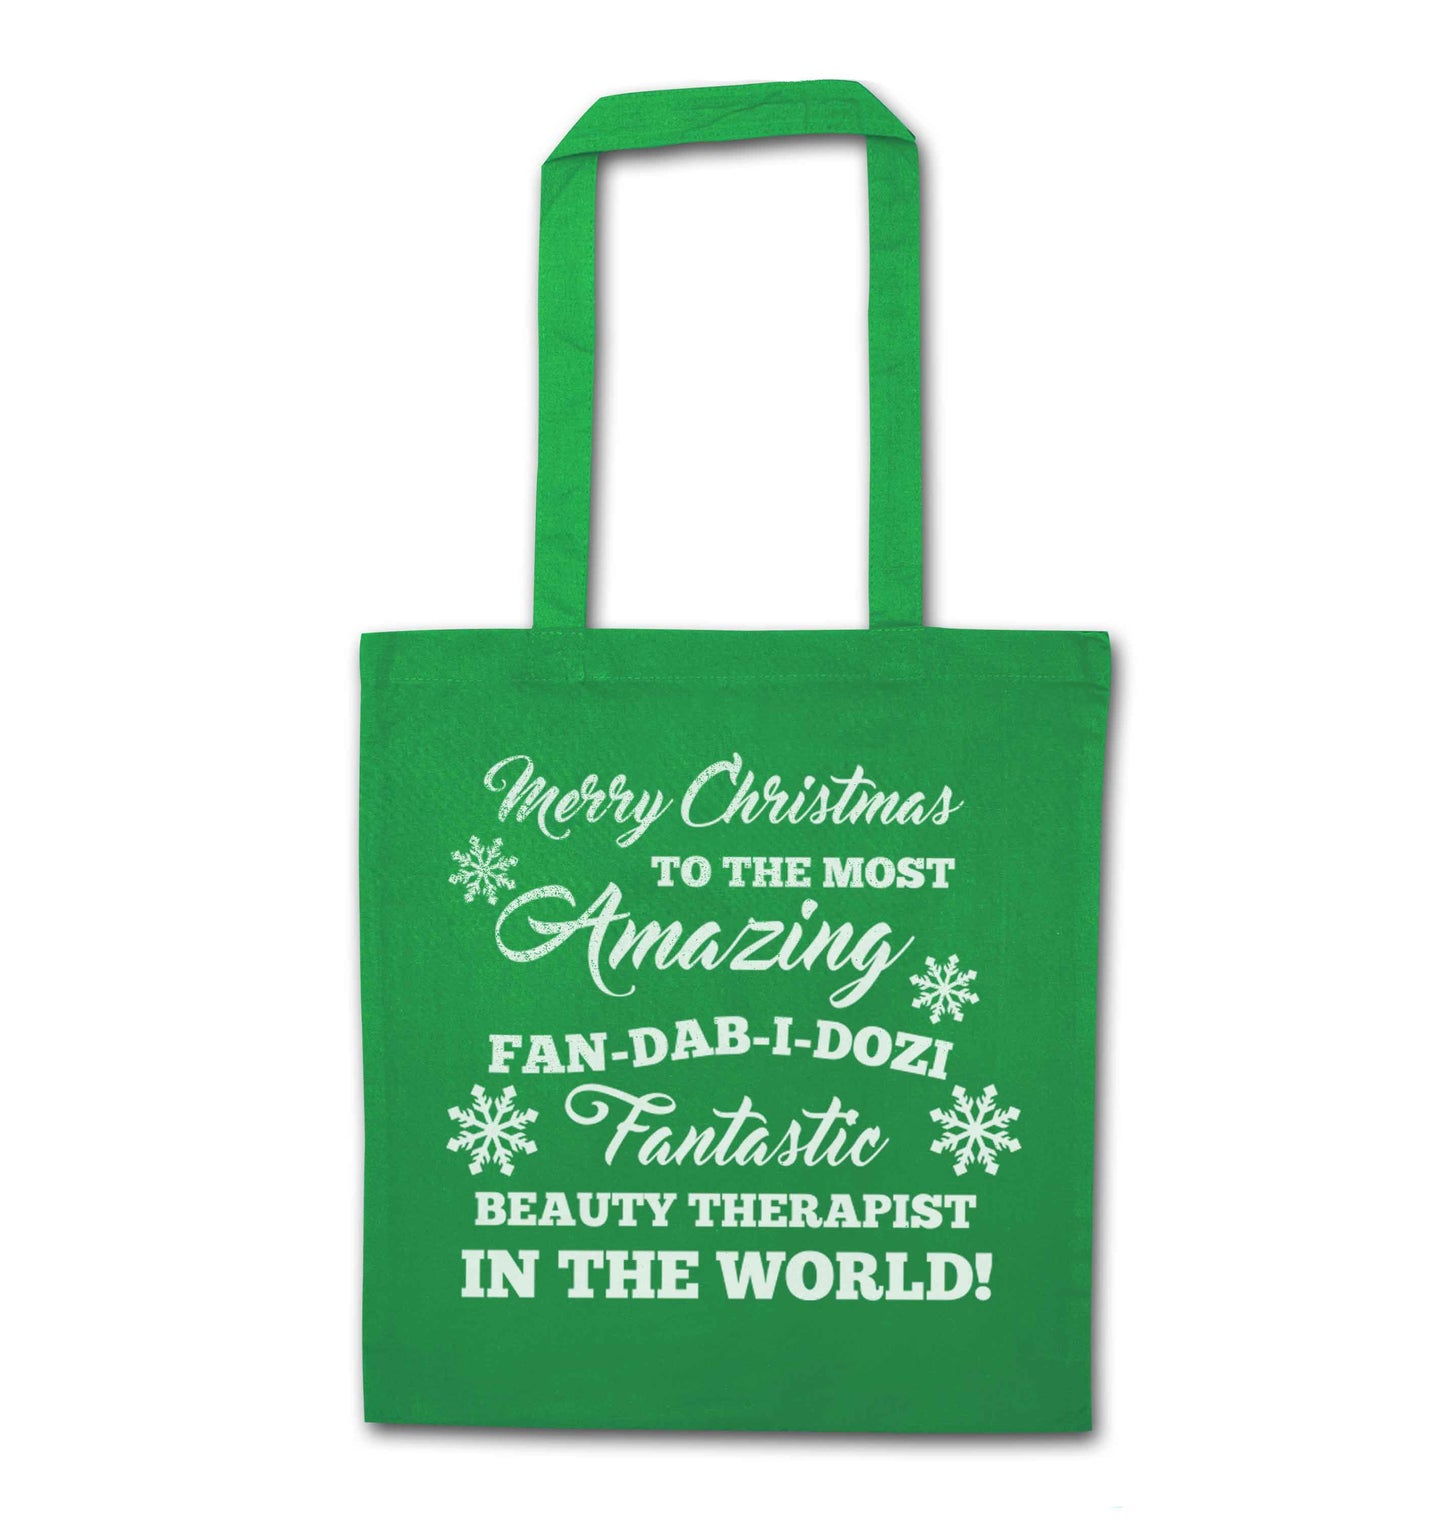 Merry Christmas to the most amazing fan-dab-i-dozi fantasic beauty therapist in the world green tote bag